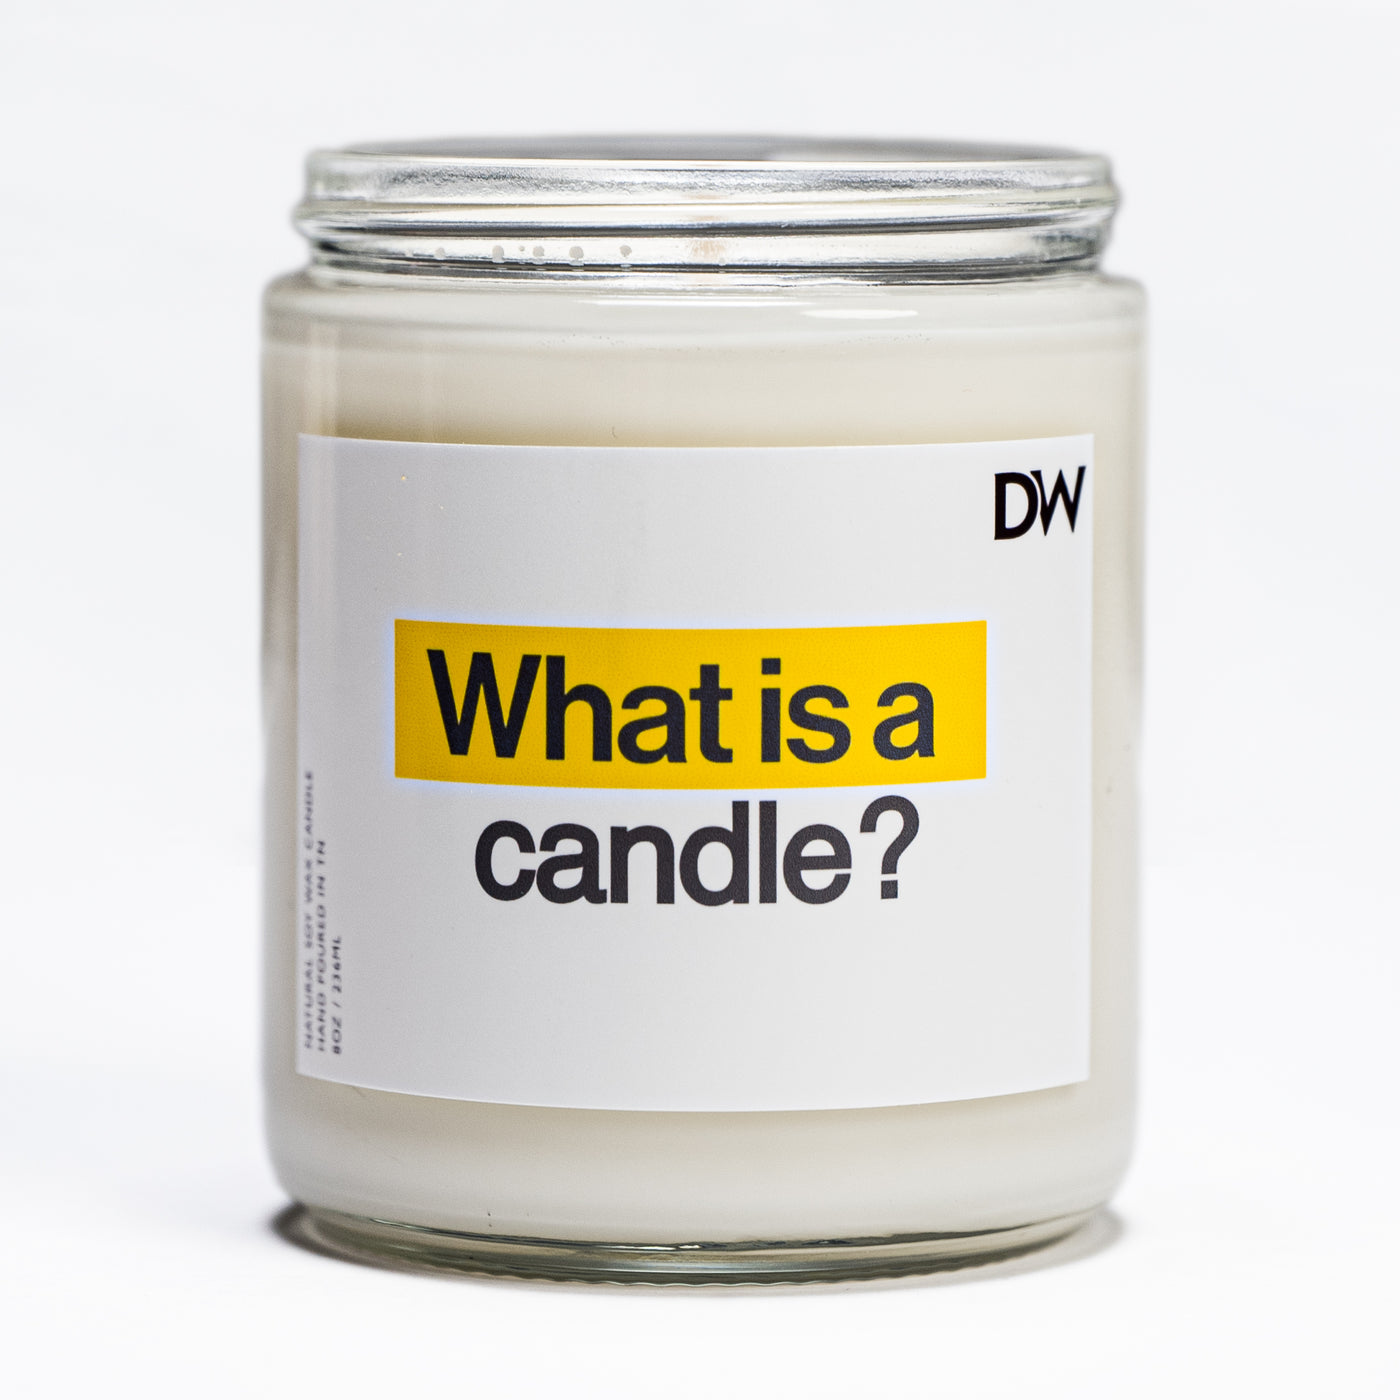 What is a Candle?